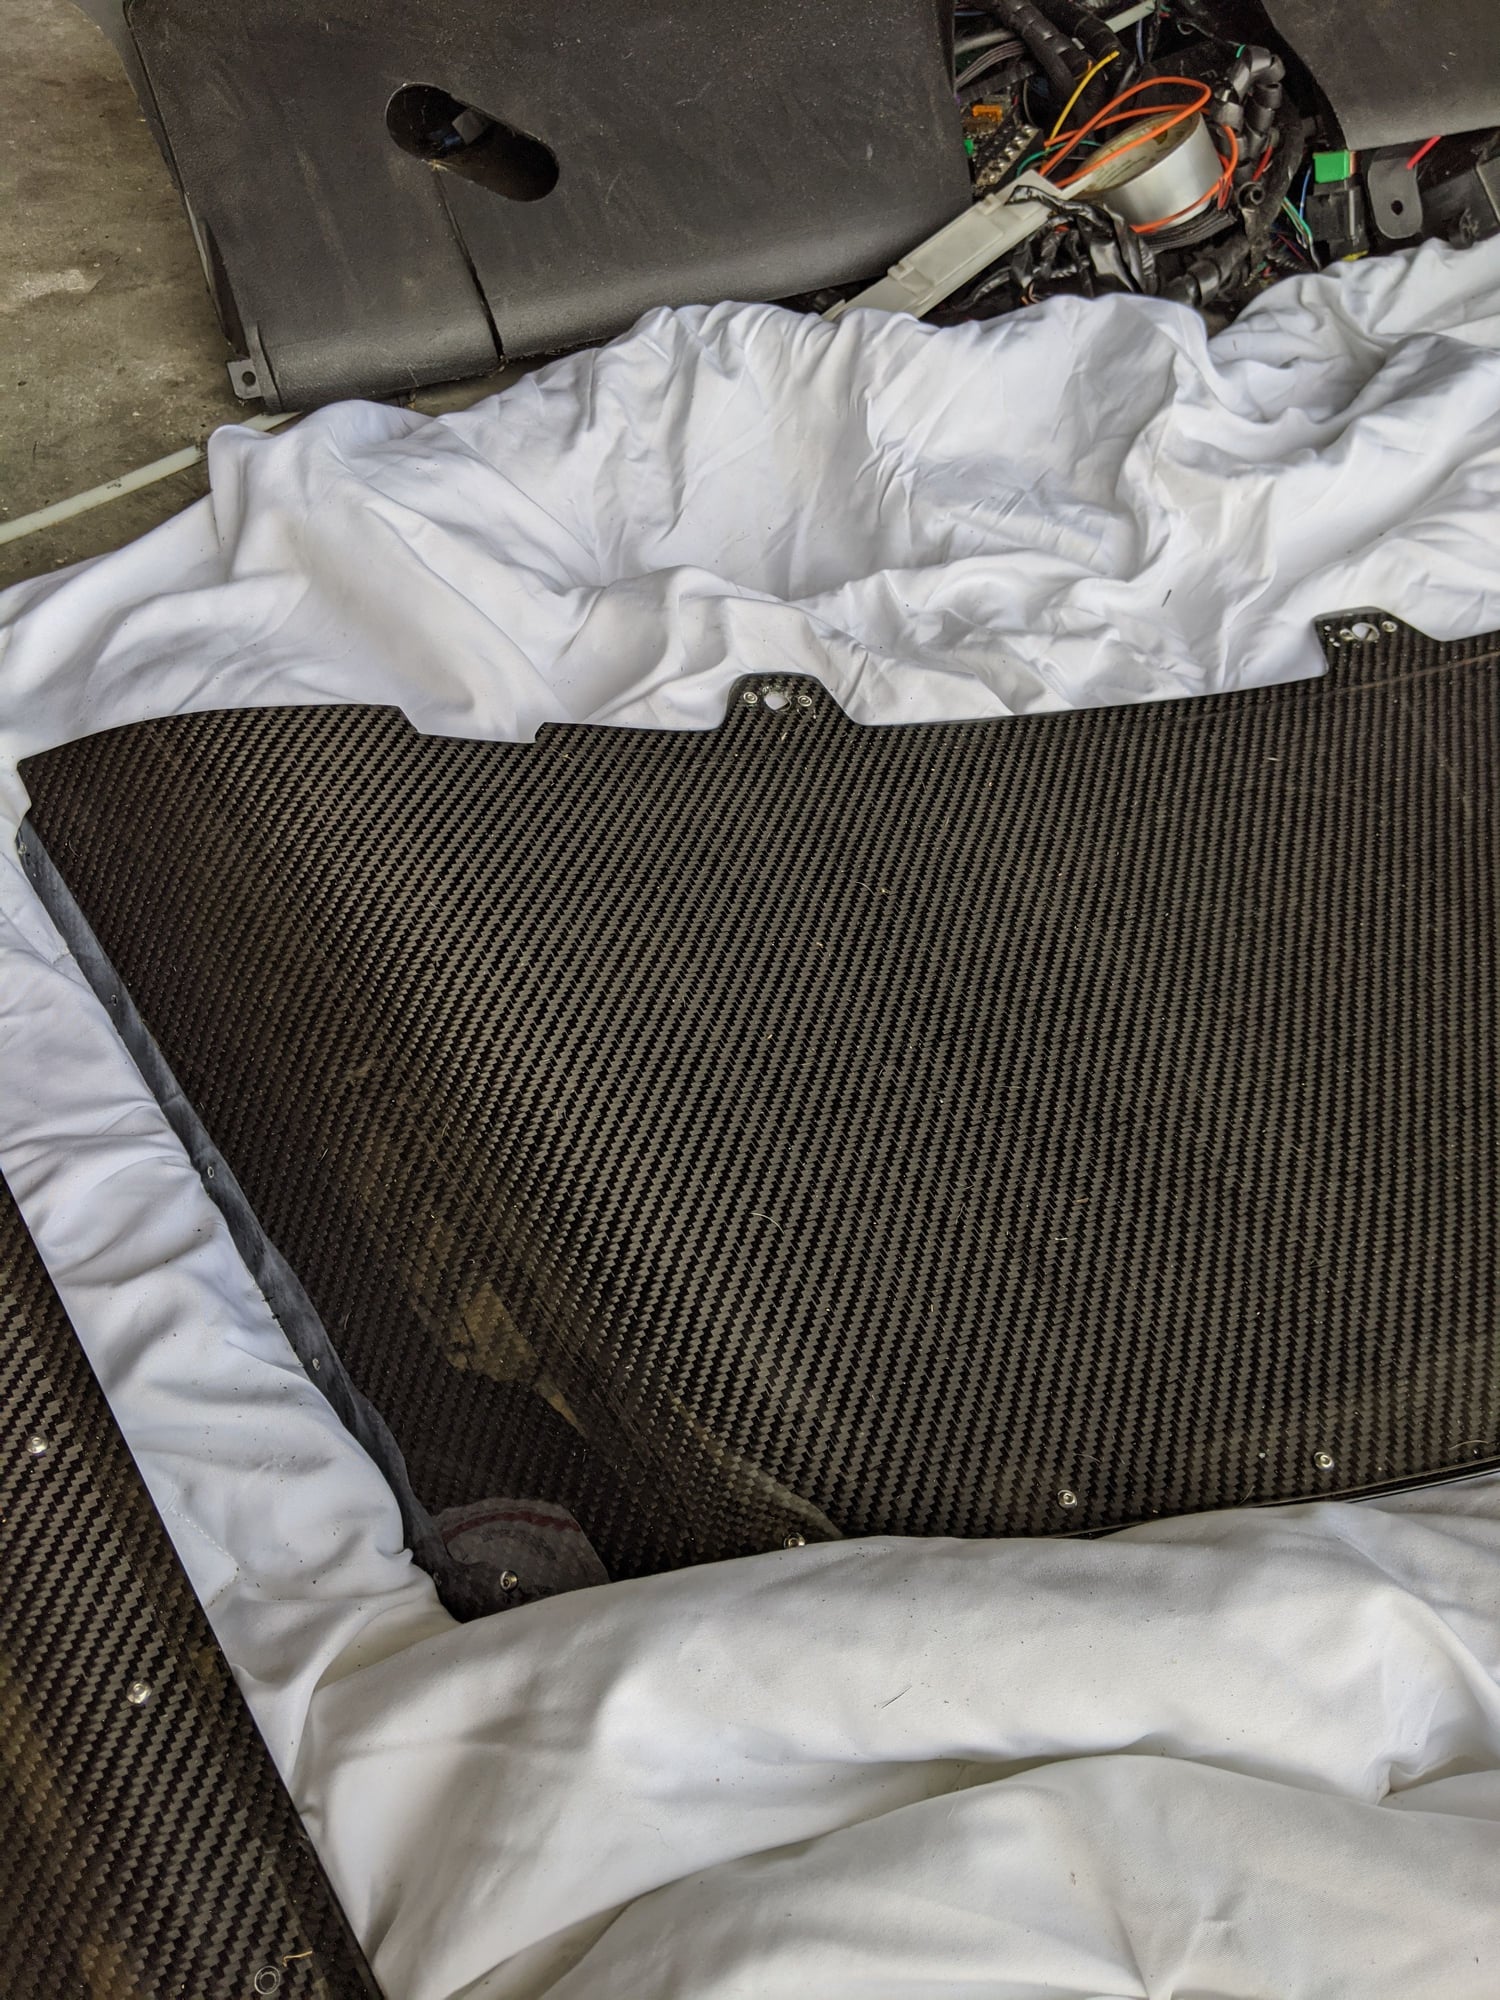 Exterior Body Parts - FD Carbon Fiber Drag wing - Used - 1993 to 2000 Mazda RX-7 - Cape Coral, FL 33993, United States